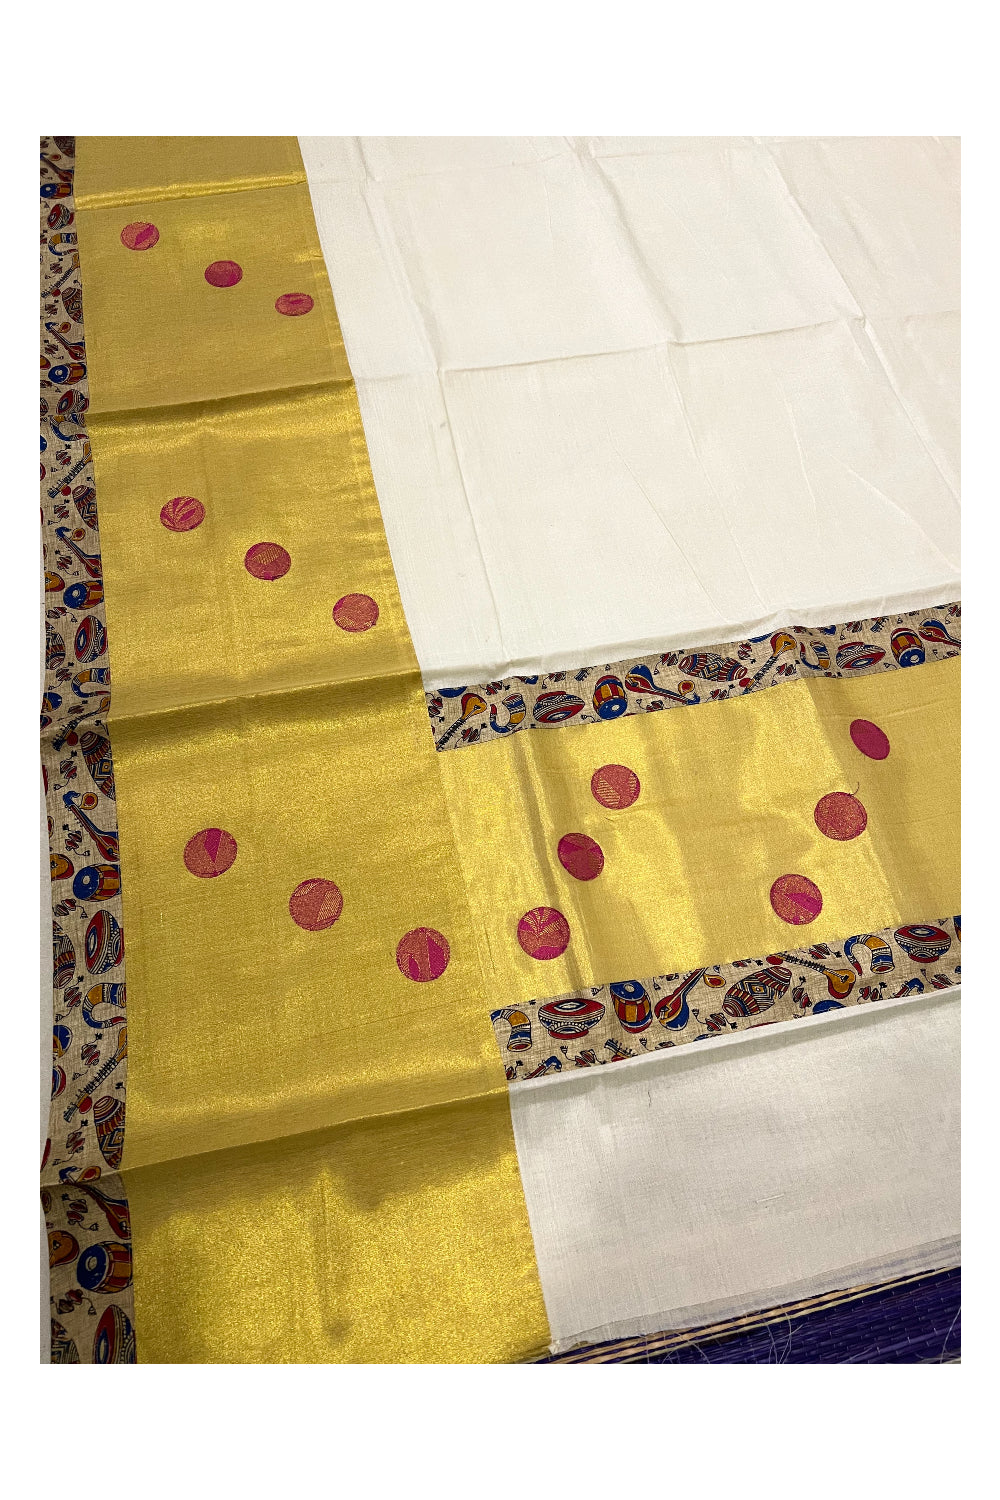 Kerala Pure Cotton Fusion Art Saree with Beige Musical Instruments Printed and Polka works on Pallu